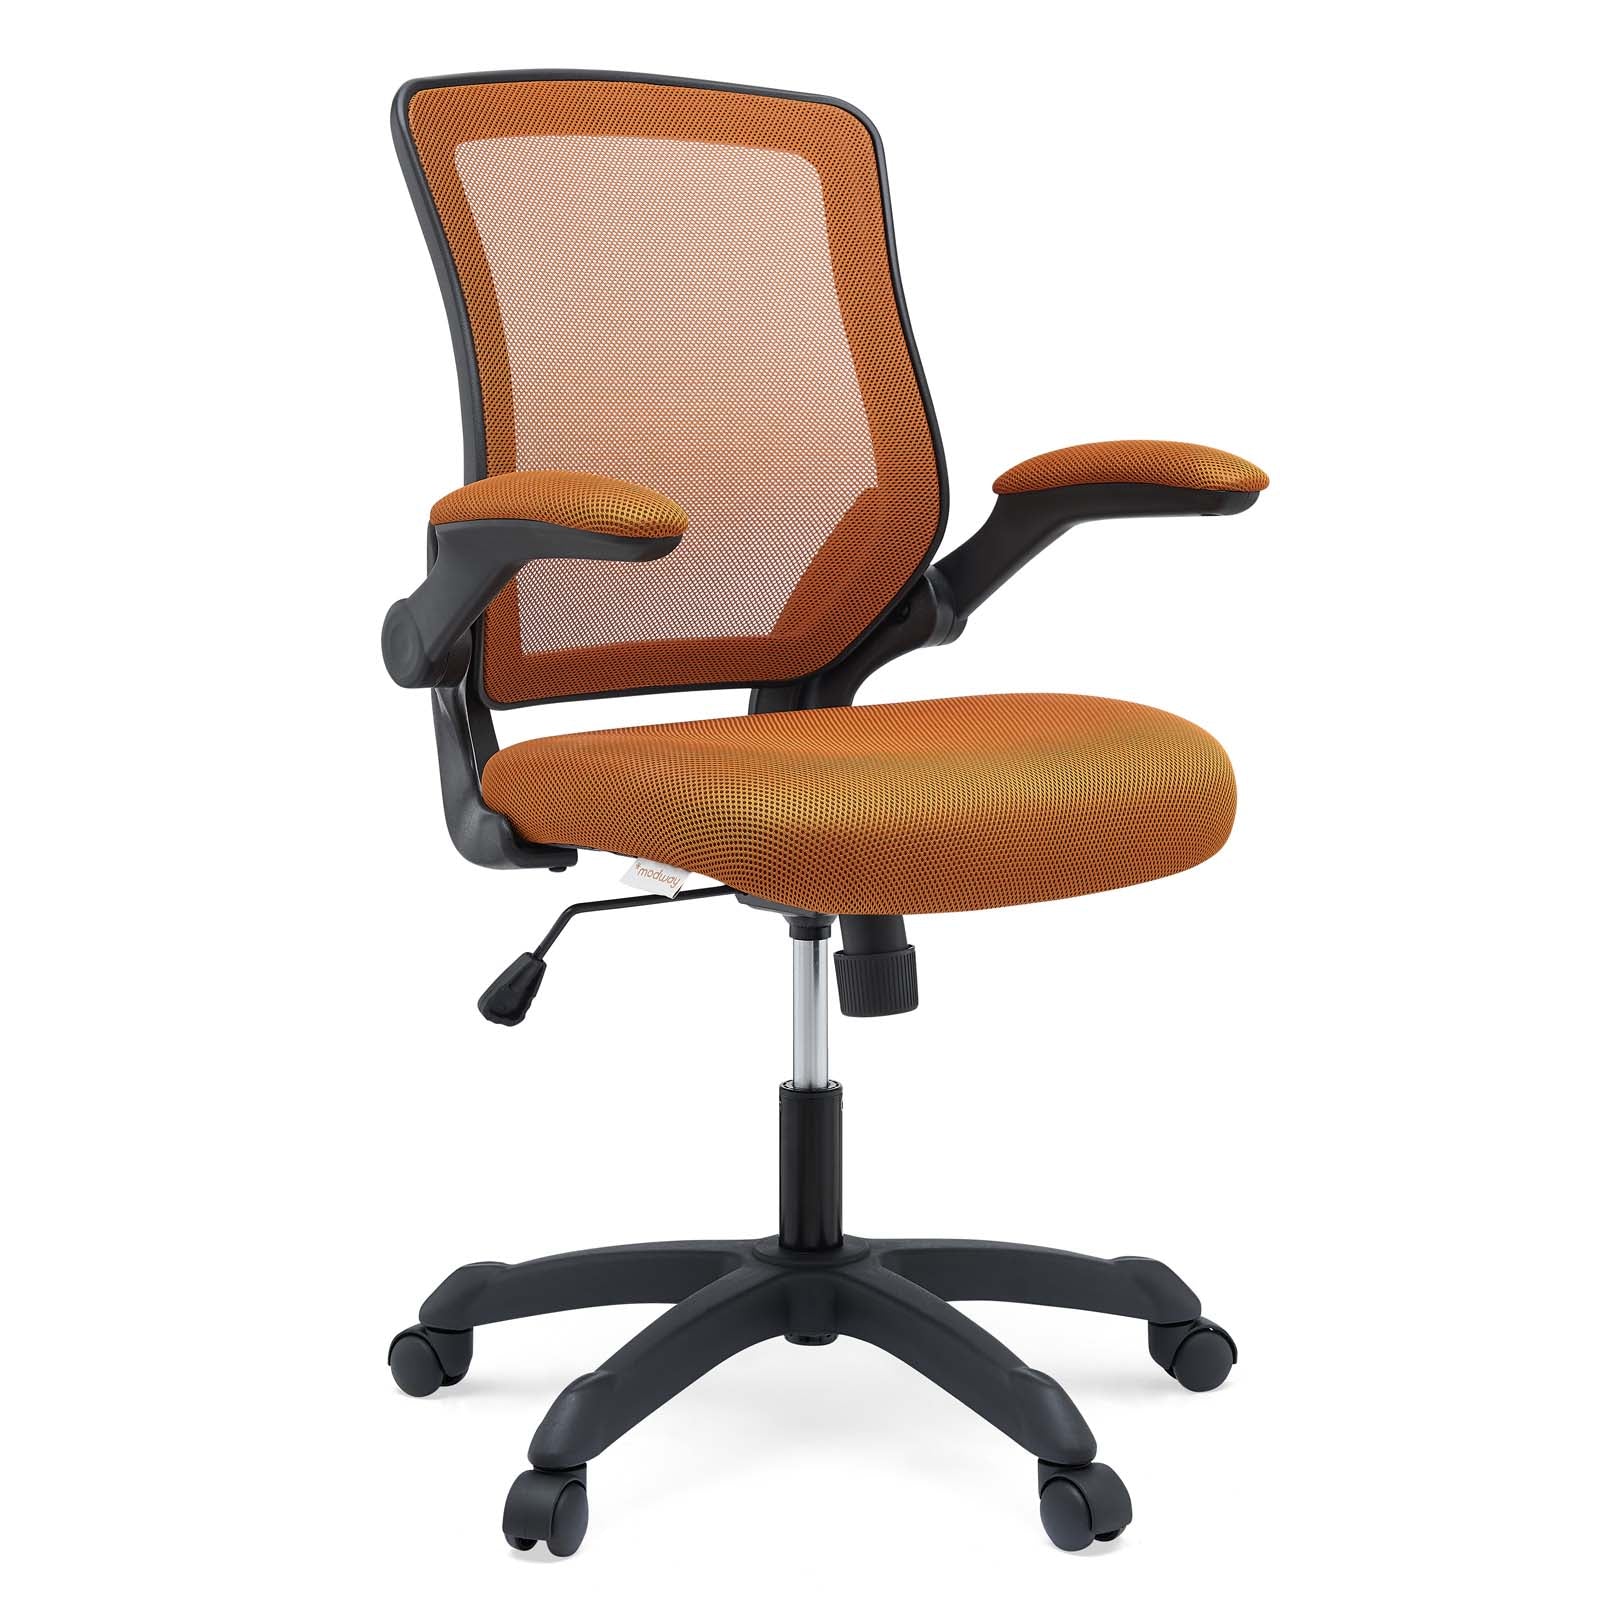 Shop Red Veer Office Chair with Mesh Fabric Seat at BUILDMyplace